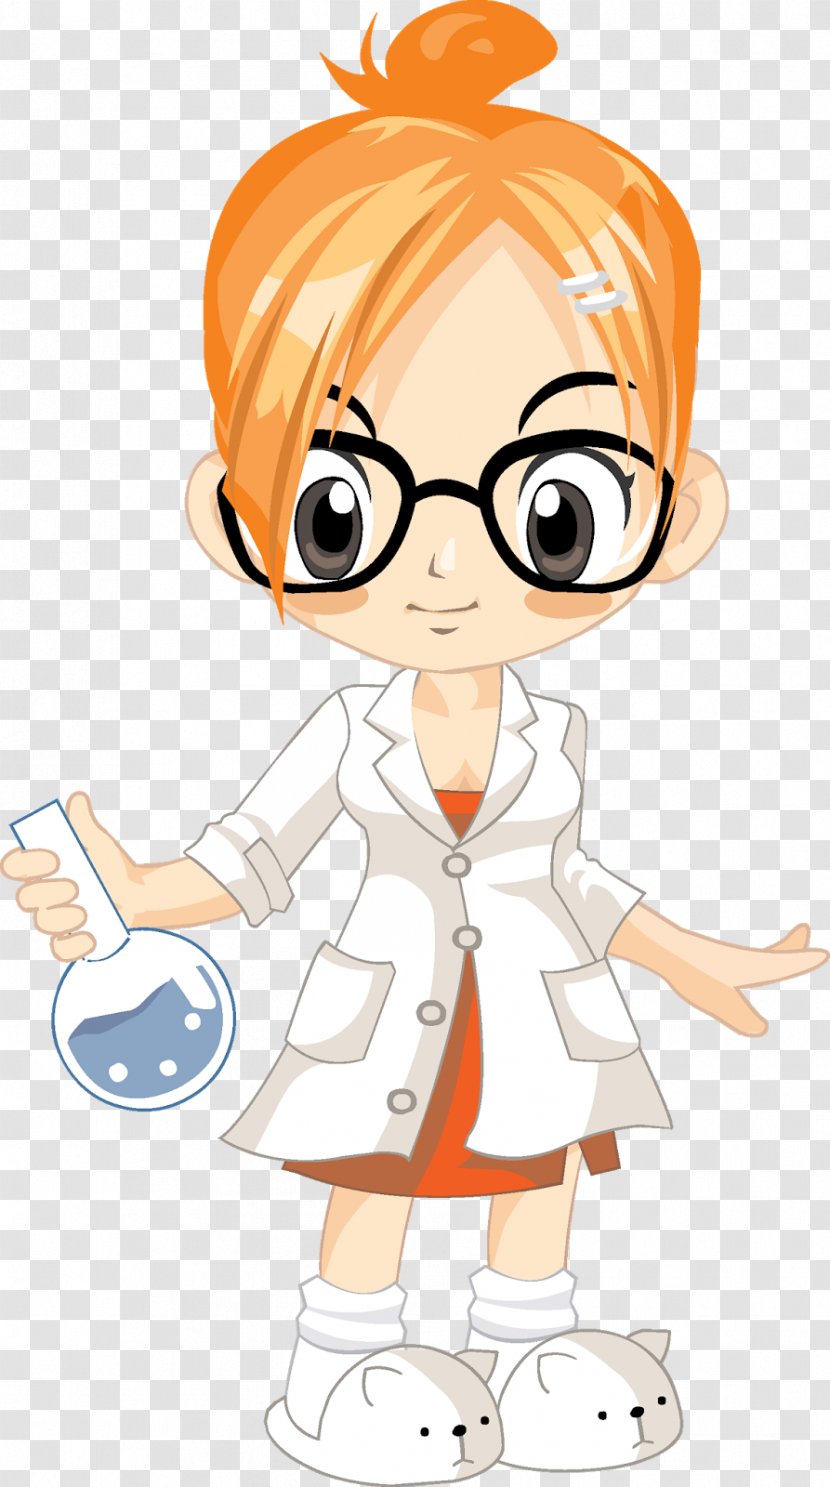 Laboratory Science Chemistry Clip Art - Frame - Cartoon Character Transparent PNG